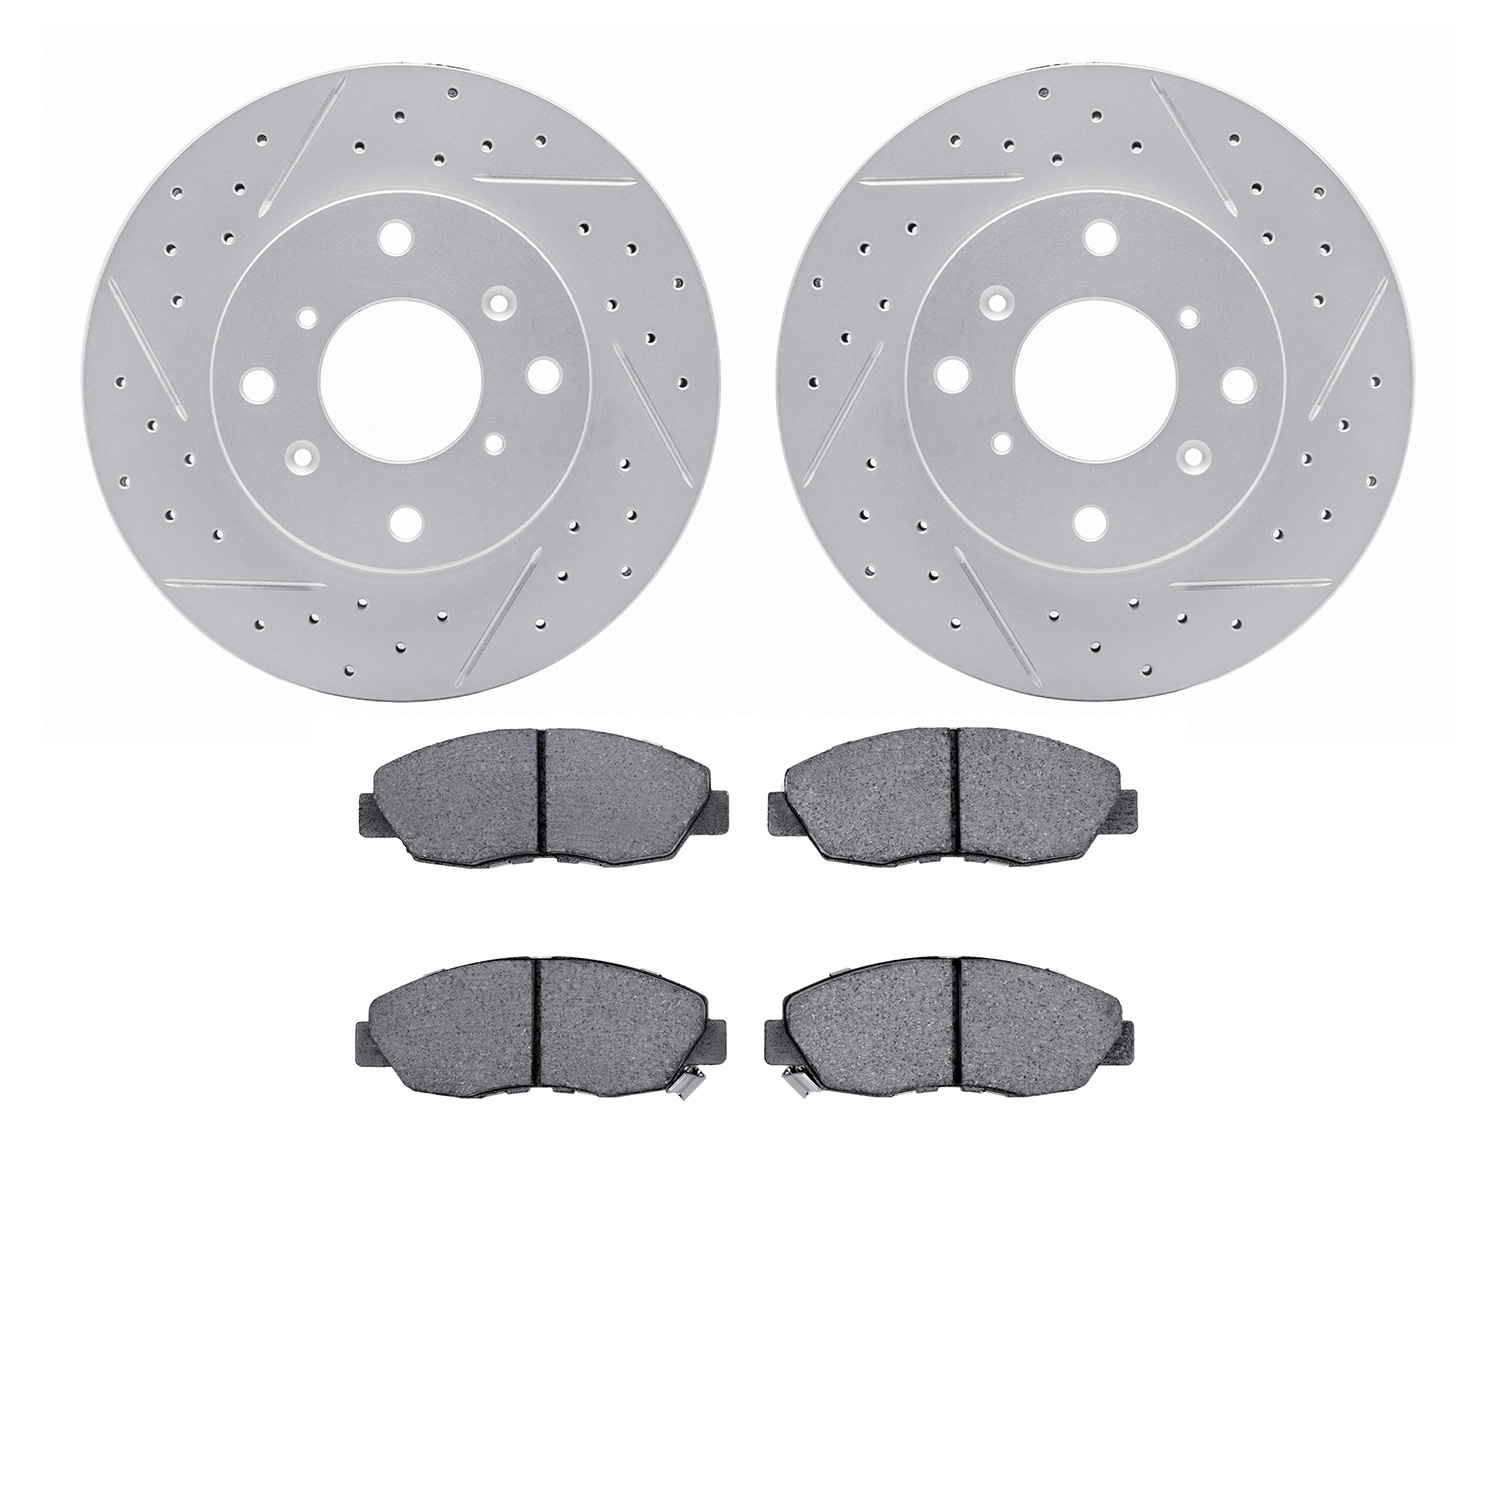 2502-59018 Geoperformance Drilled/Slotted Rotors w/5000 Advanced Brake Pads Kit, 1998-1999 Acura/Honda, Position: Front